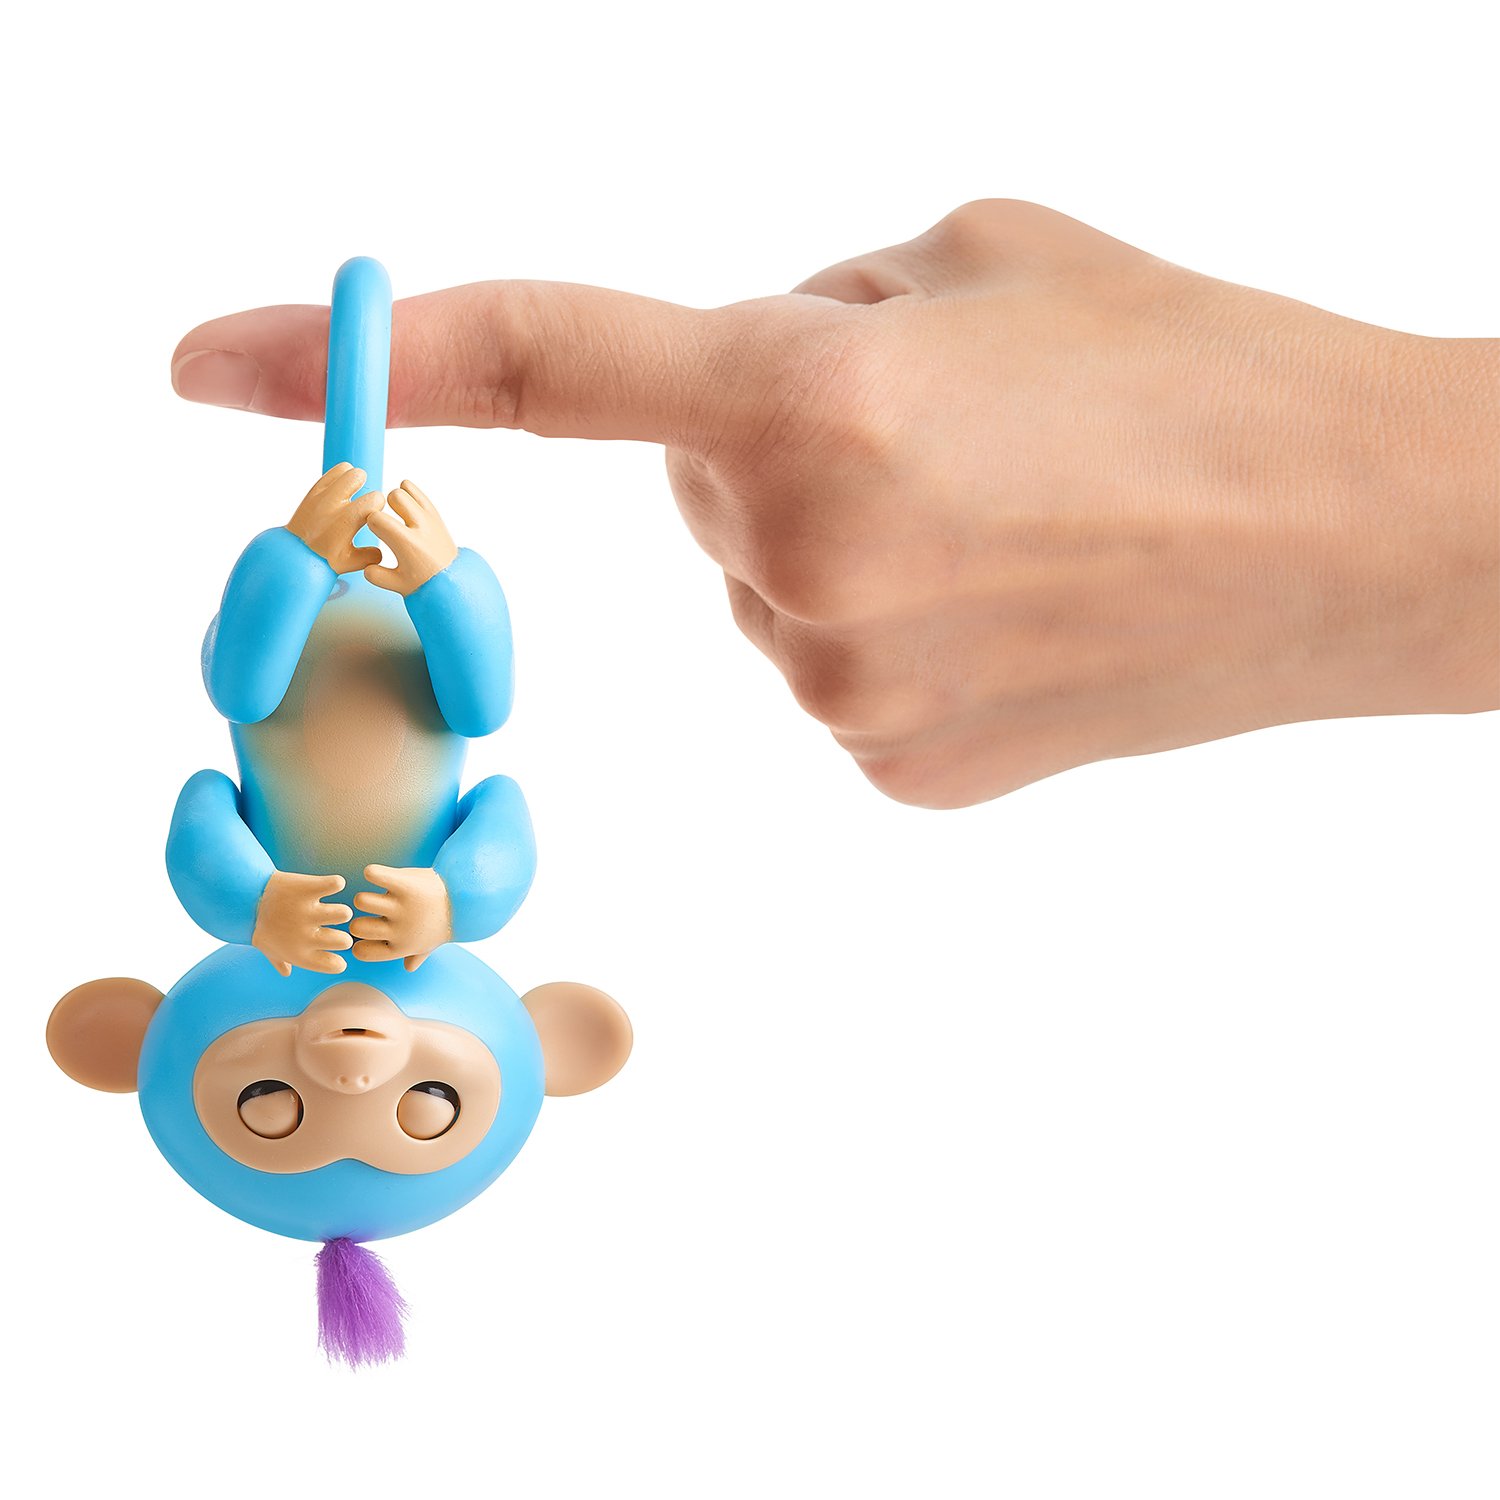 WowWee Fingerlings Playset – See-Saw with 2 Baby Monkey Toys, “Willy” (Blue) and “Milly” (Purple)